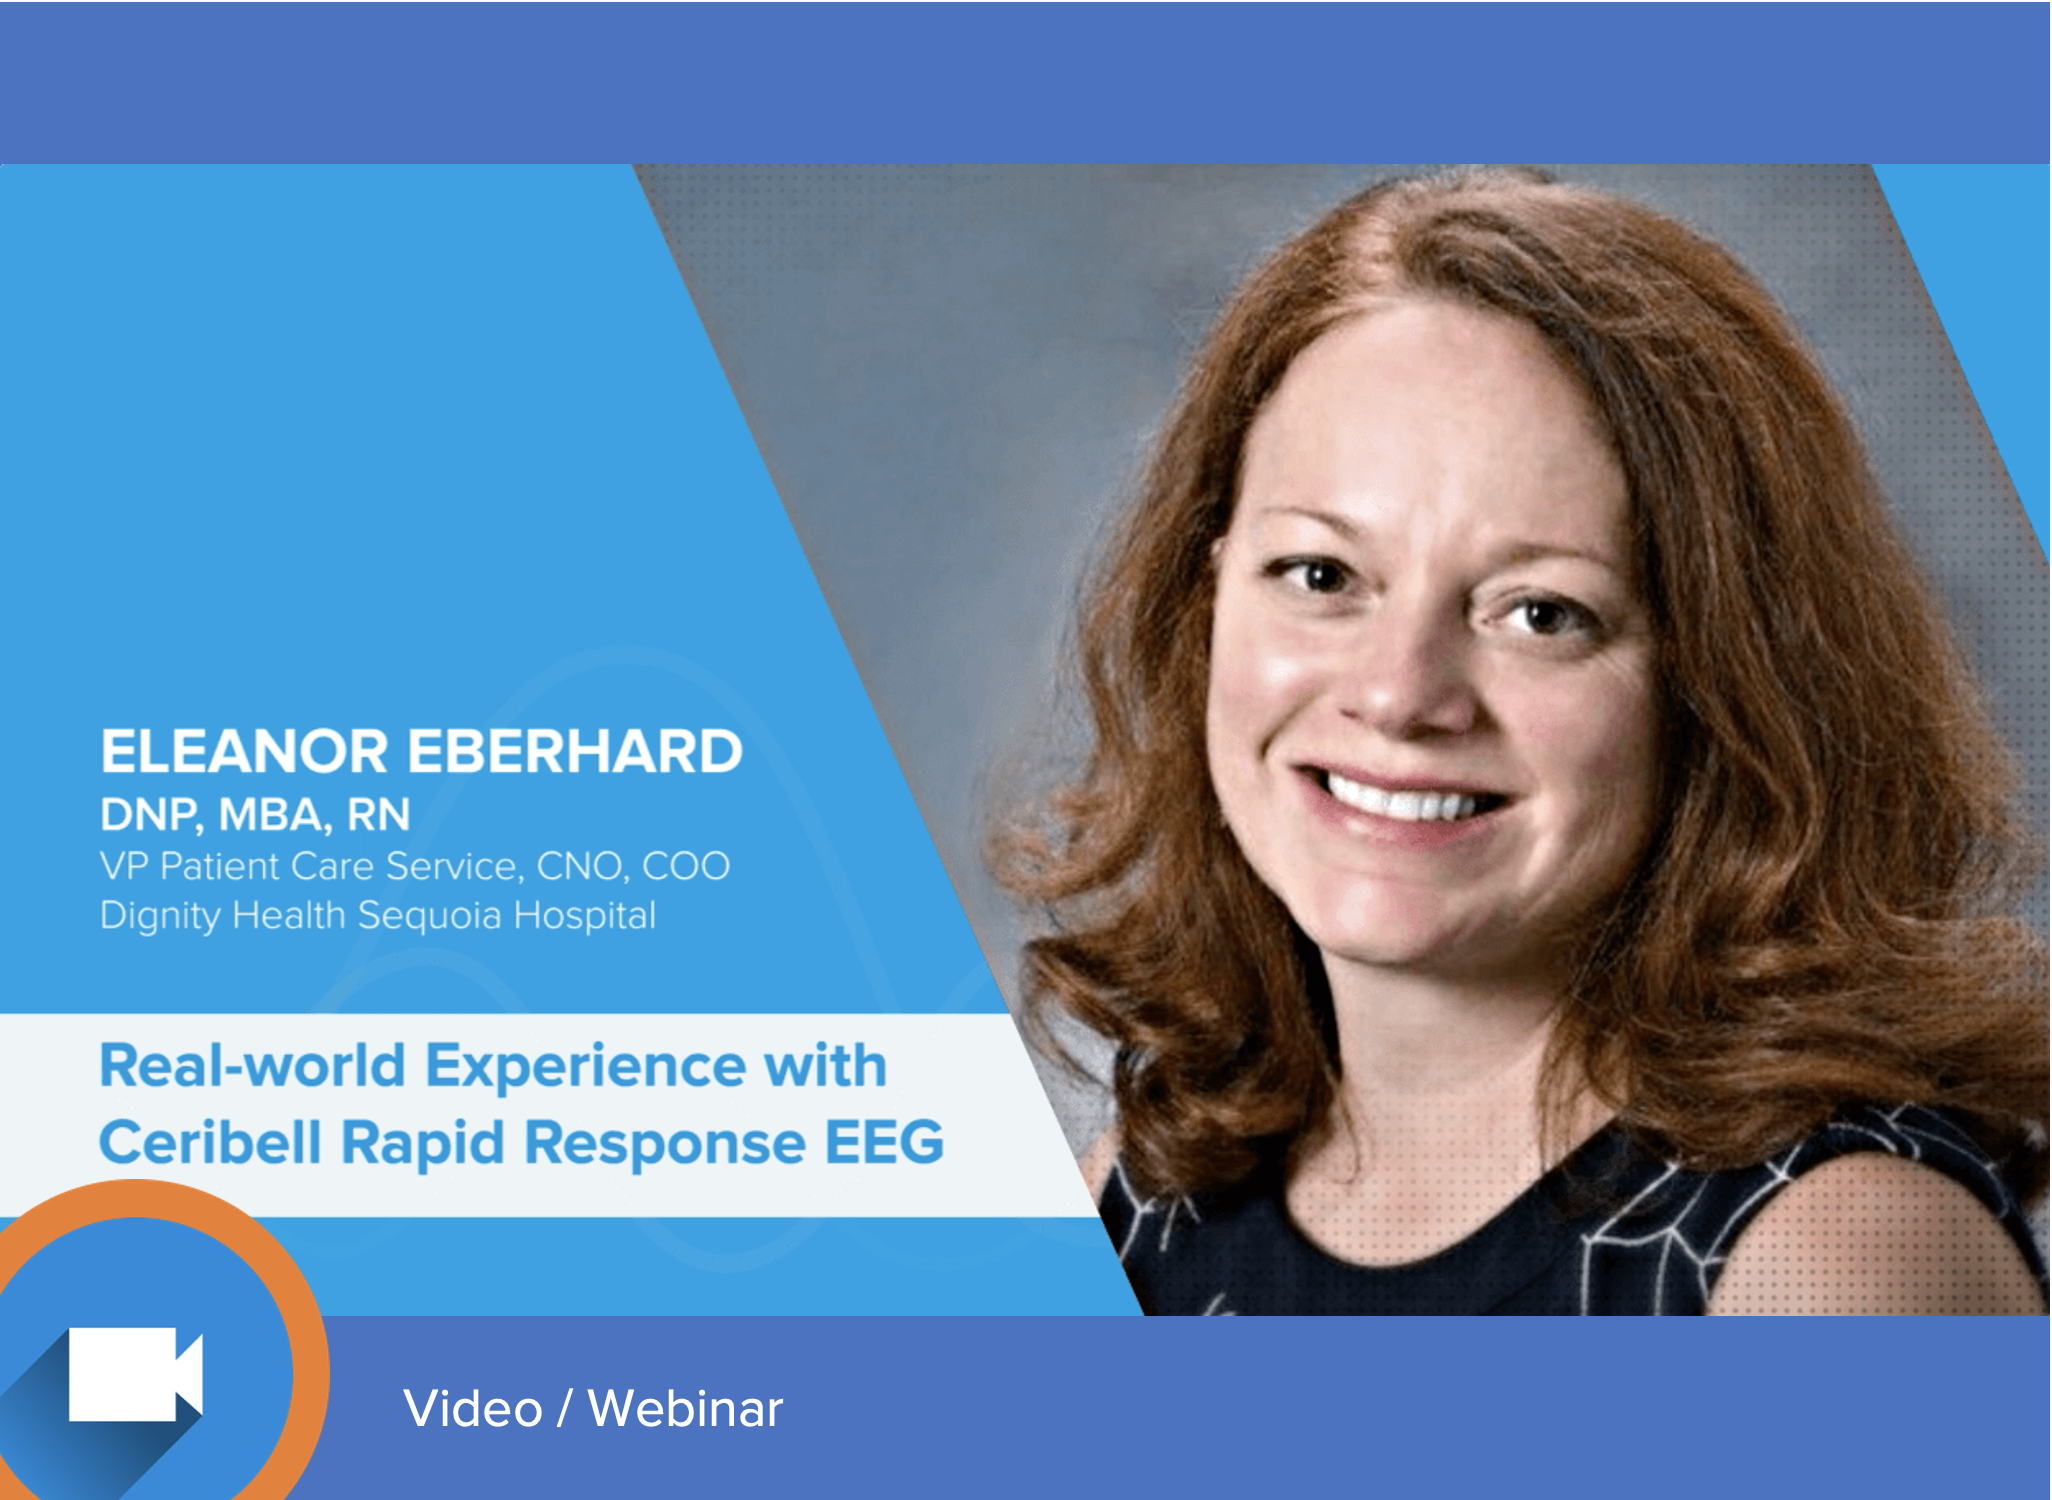 Health Economics and Staffing Webinar: Expanding Care with Ceribell Rapid EEG Improves Staff Satisfaction and Finances